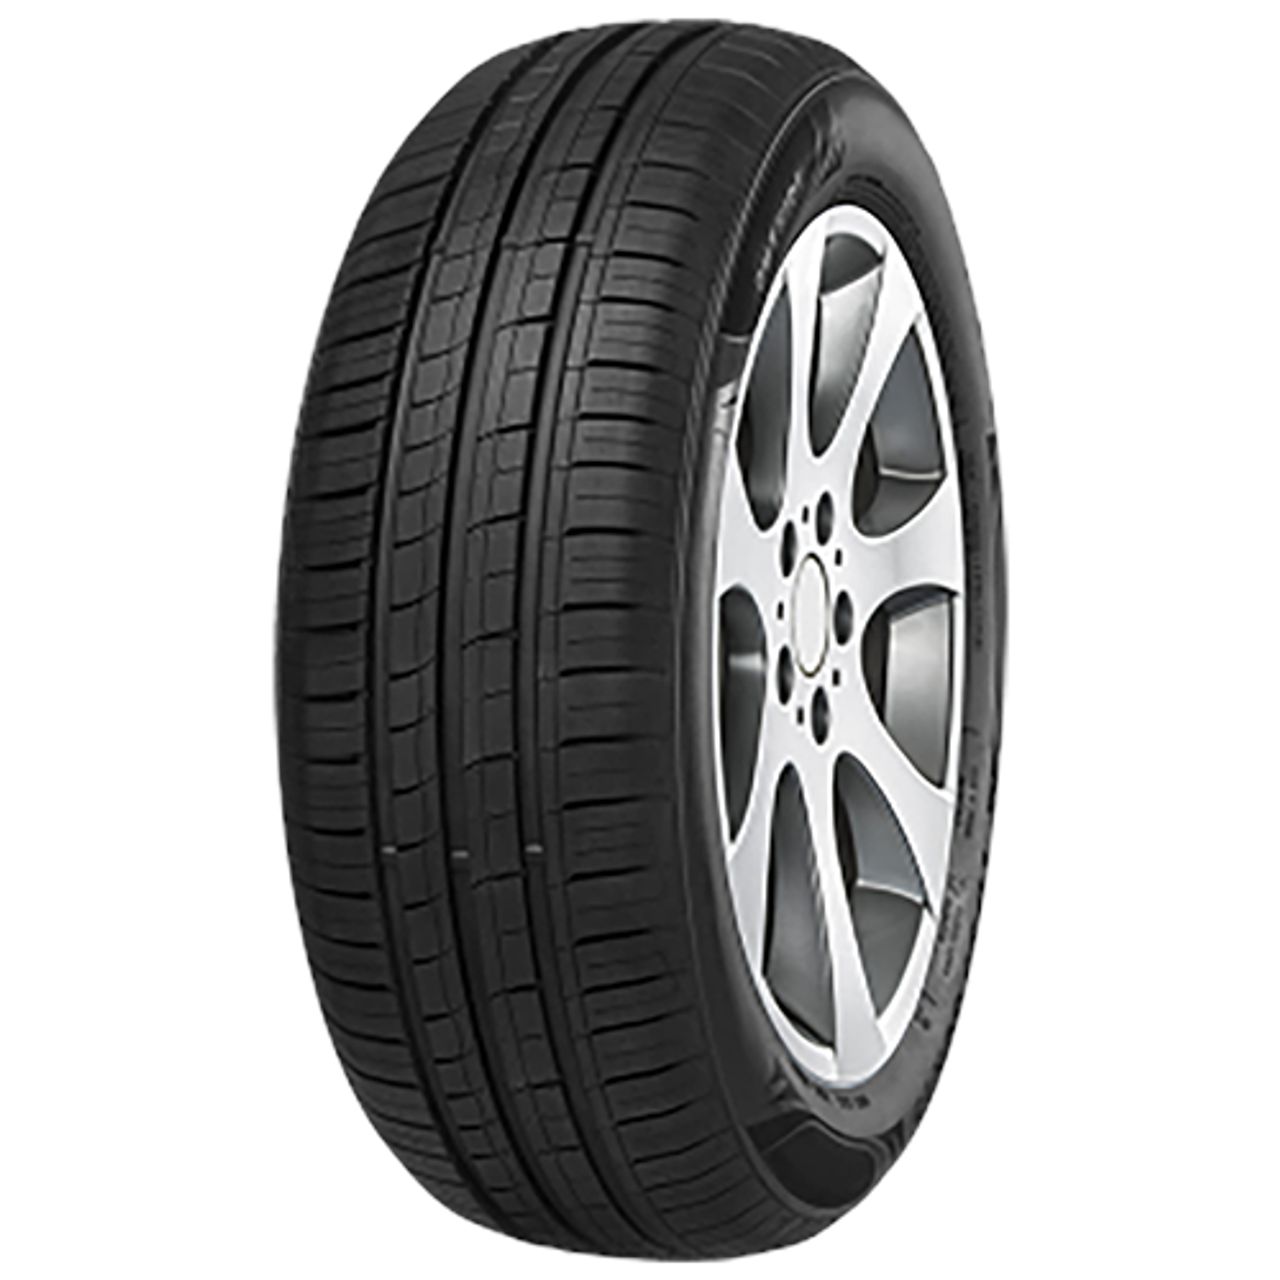 IMPERIAL ECODRIVER 4 155/70R13 75T